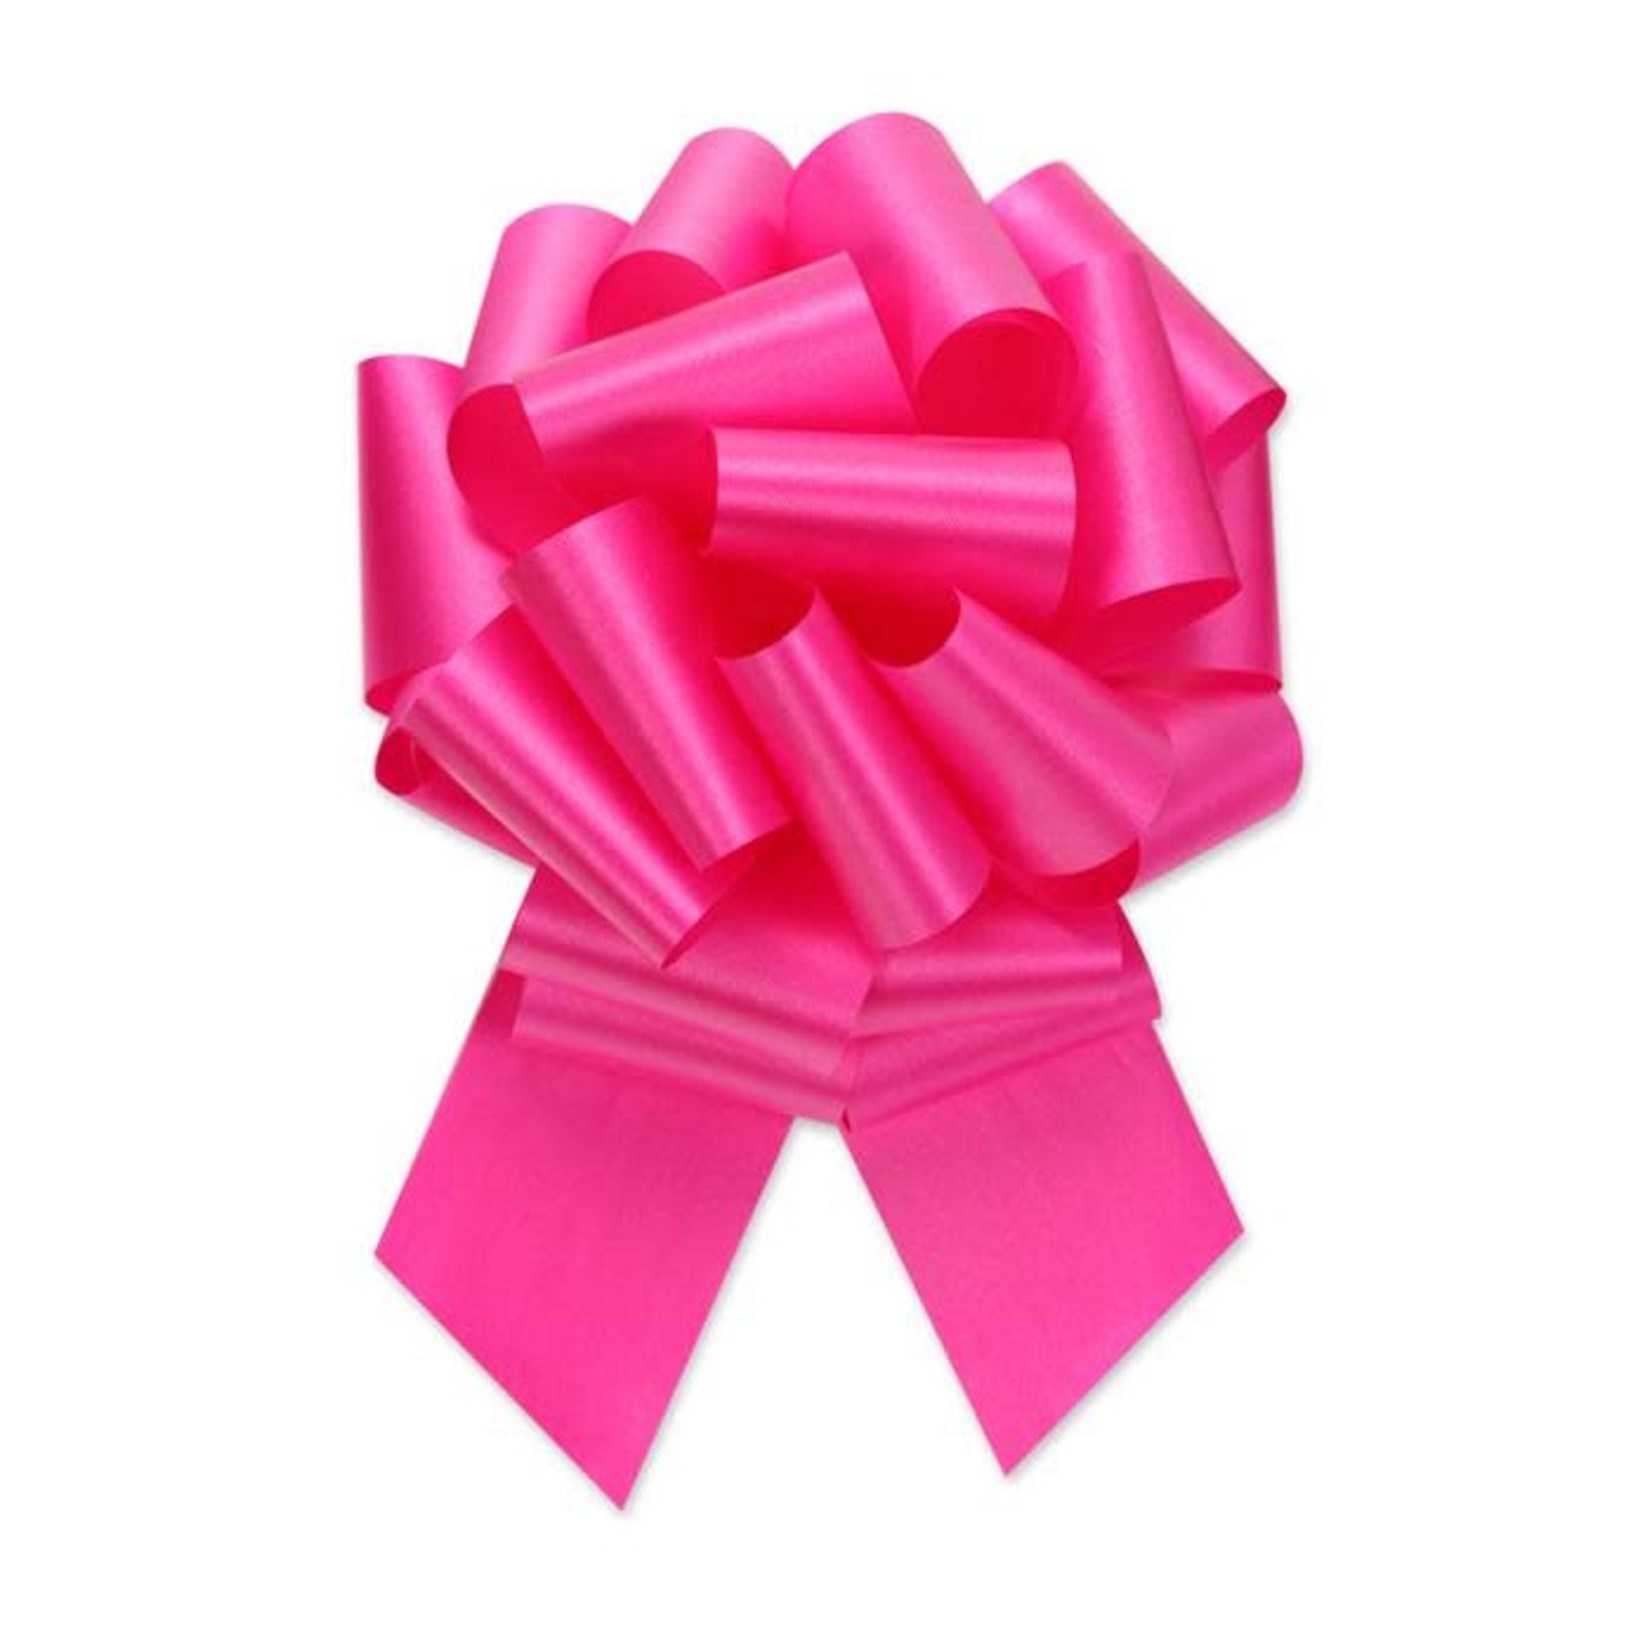 PERFECT BOW  #9 BEAUTY, 1.5” ribbon width, 5.5" bow size, 20 loops